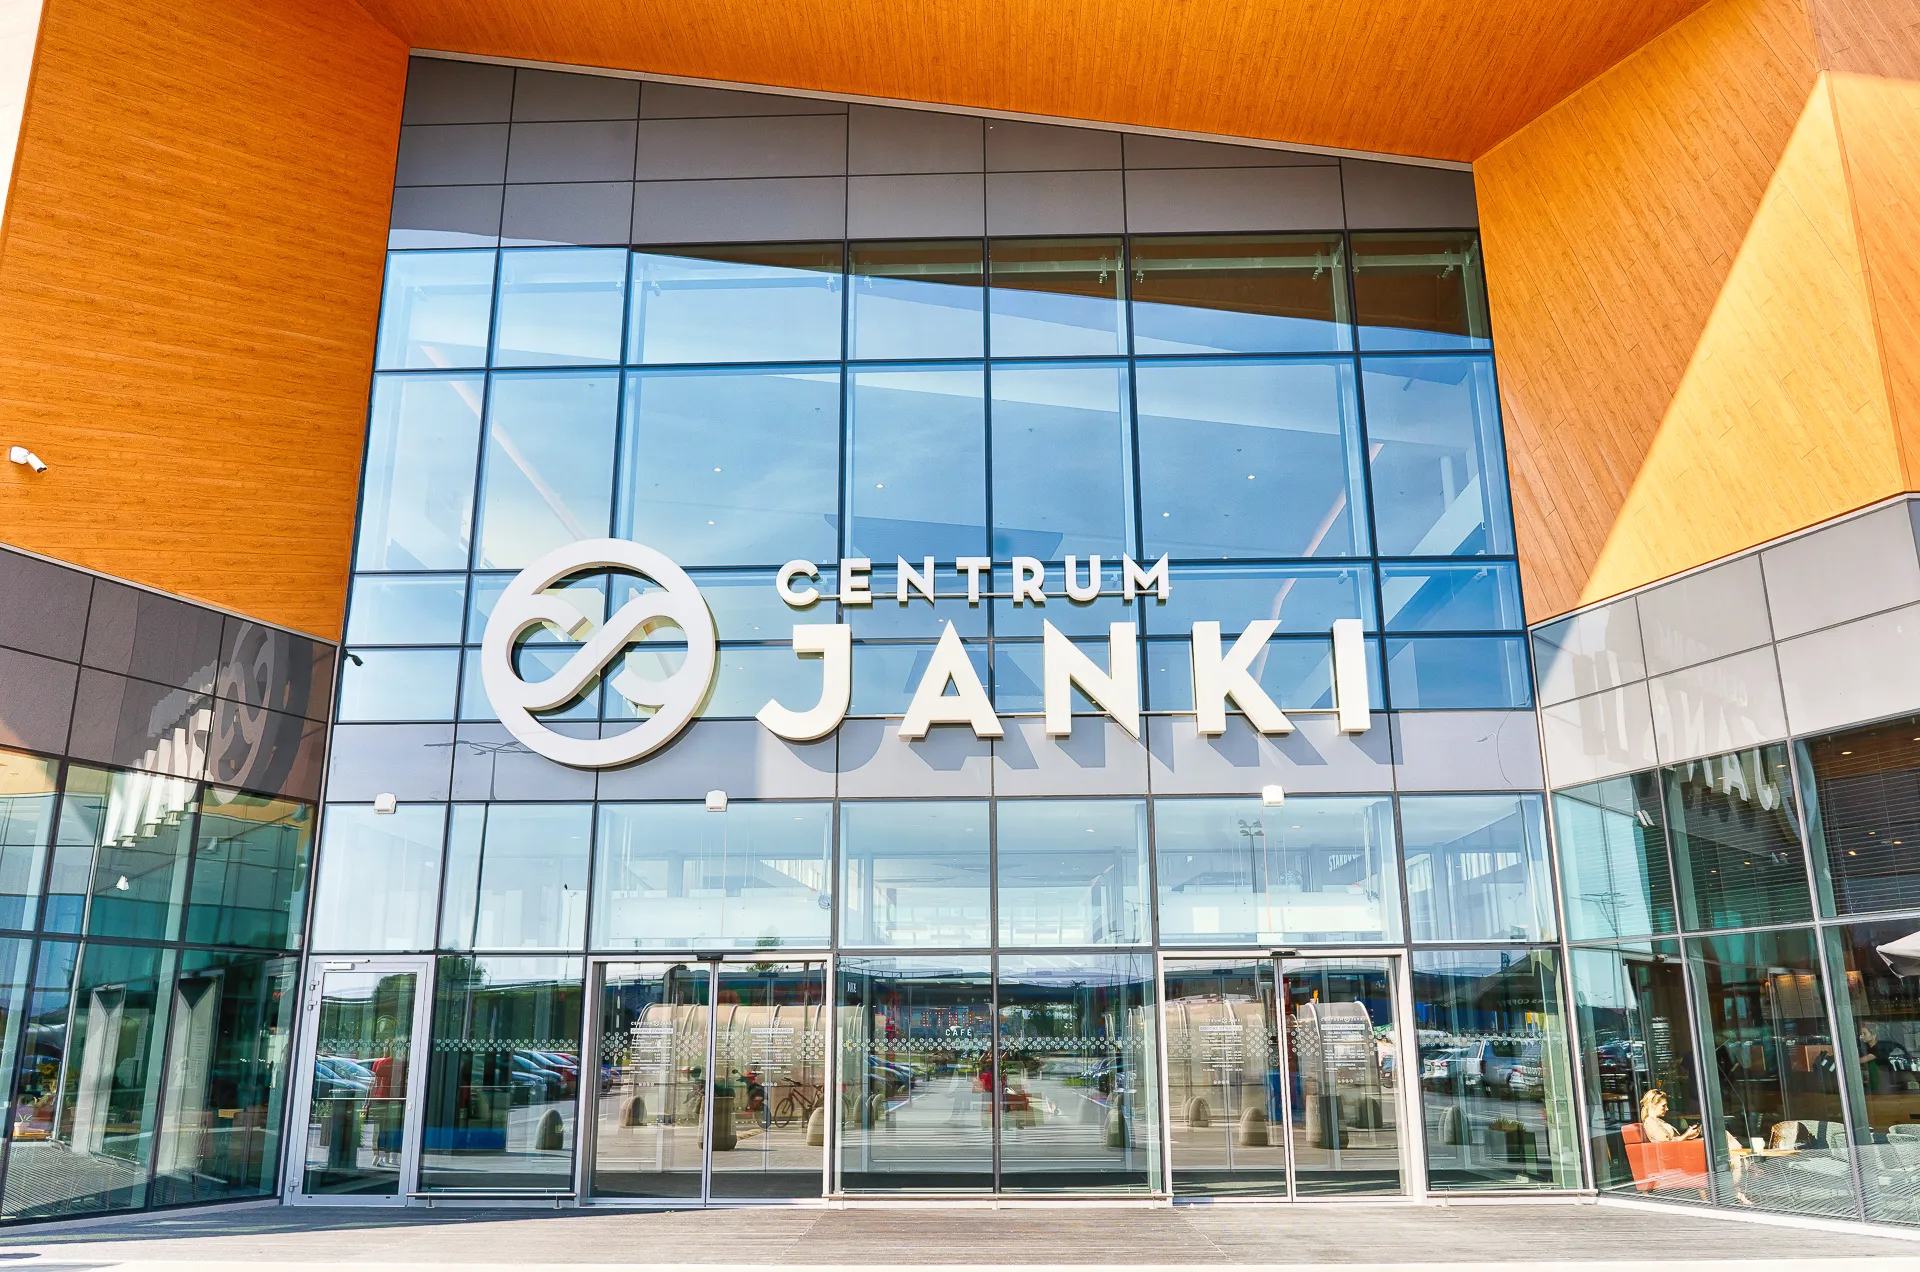 Janki Shopping Center in Poland, europe | Fragrance,Handbags,Shoes,Clothes,Cosmetics - Country Helper